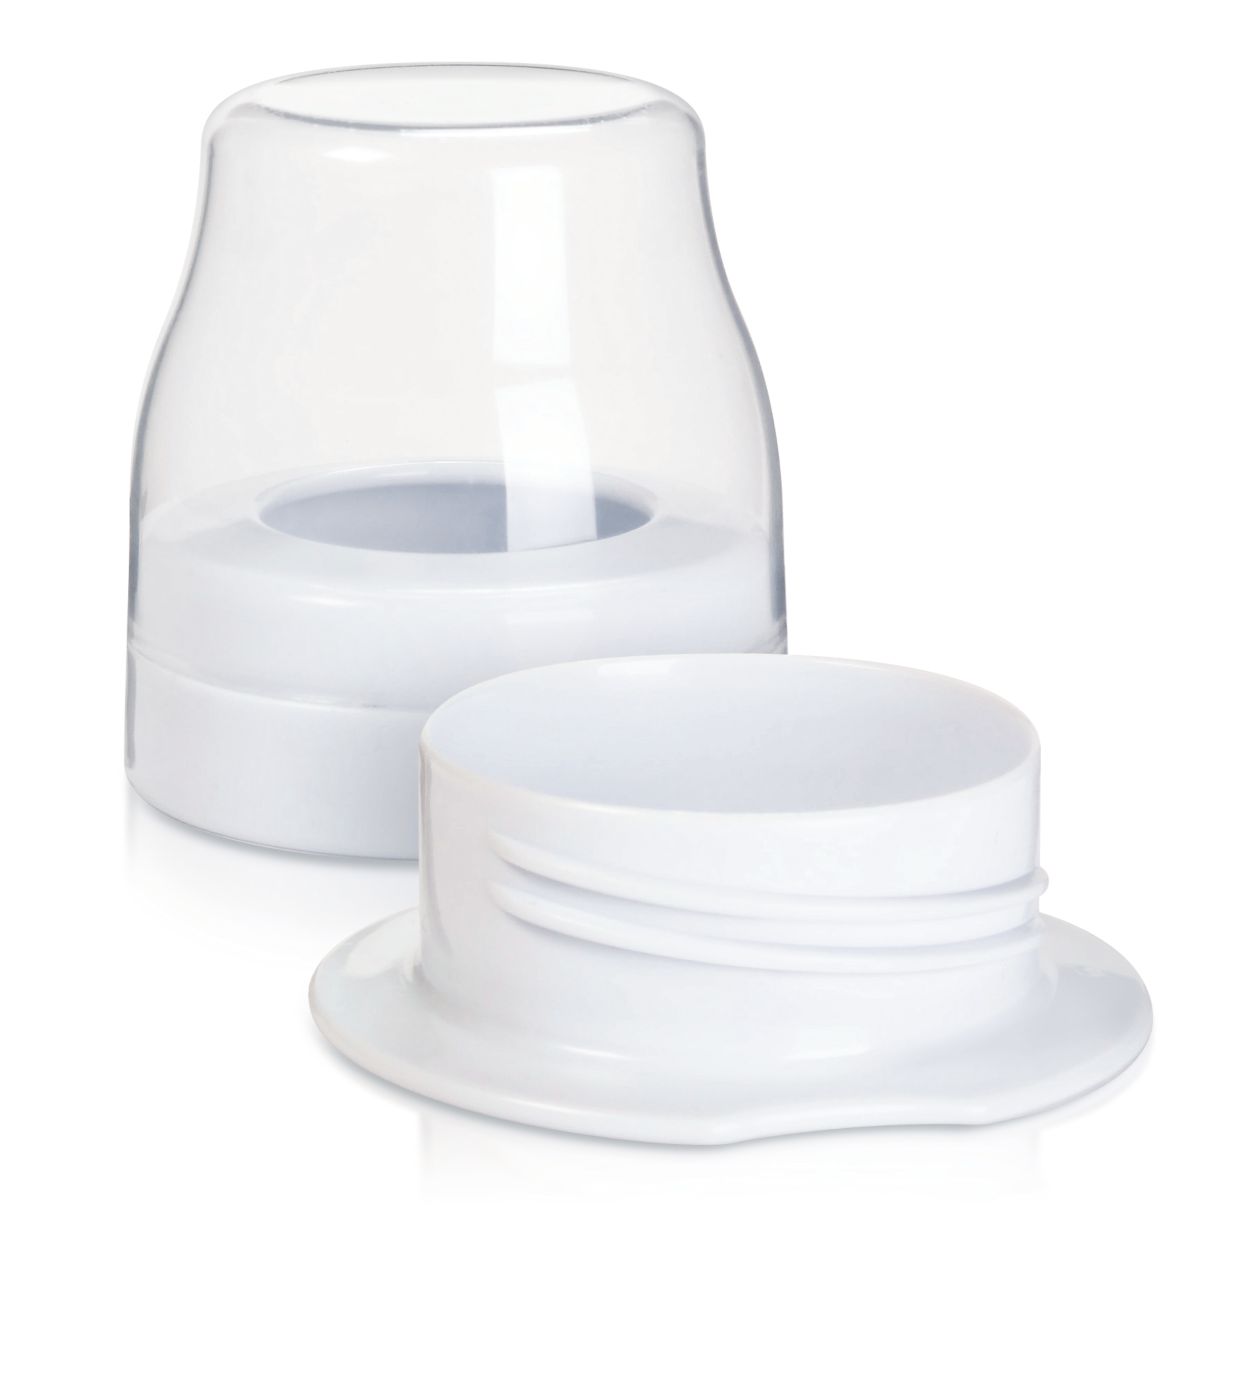 Keeps Avent teats sterile for up to 24 hours